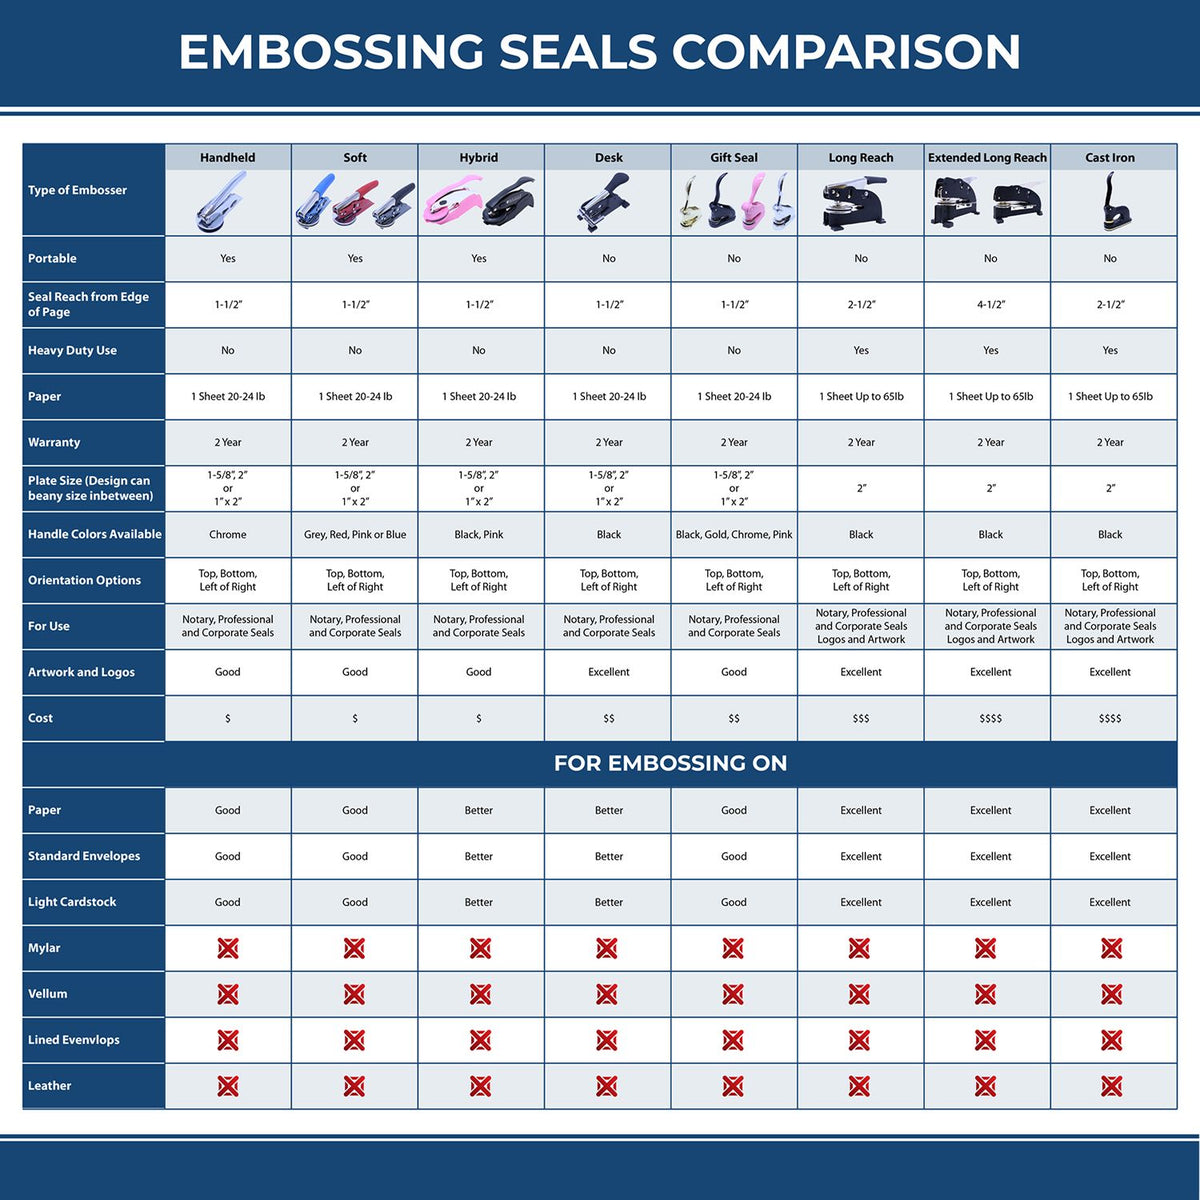 A comparison chart for the different types of mount models available for the Heavy Duty Cast Iron Florida Engineer Seal Embosser.